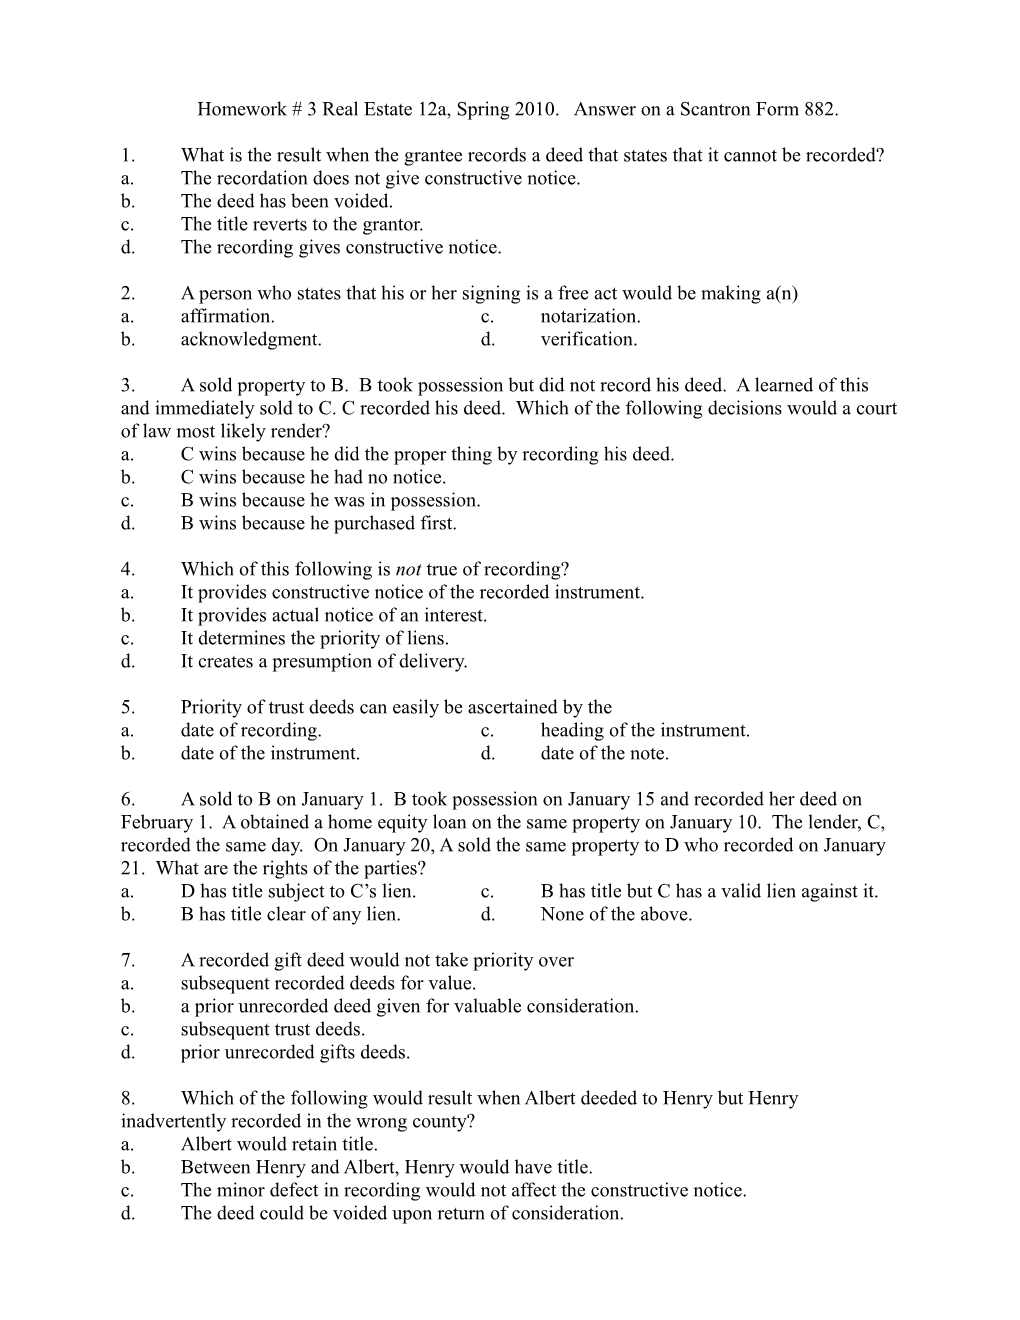 Homework # 3 Real Estate 12A, Spring 2010. Answer on a Scantron Form 882